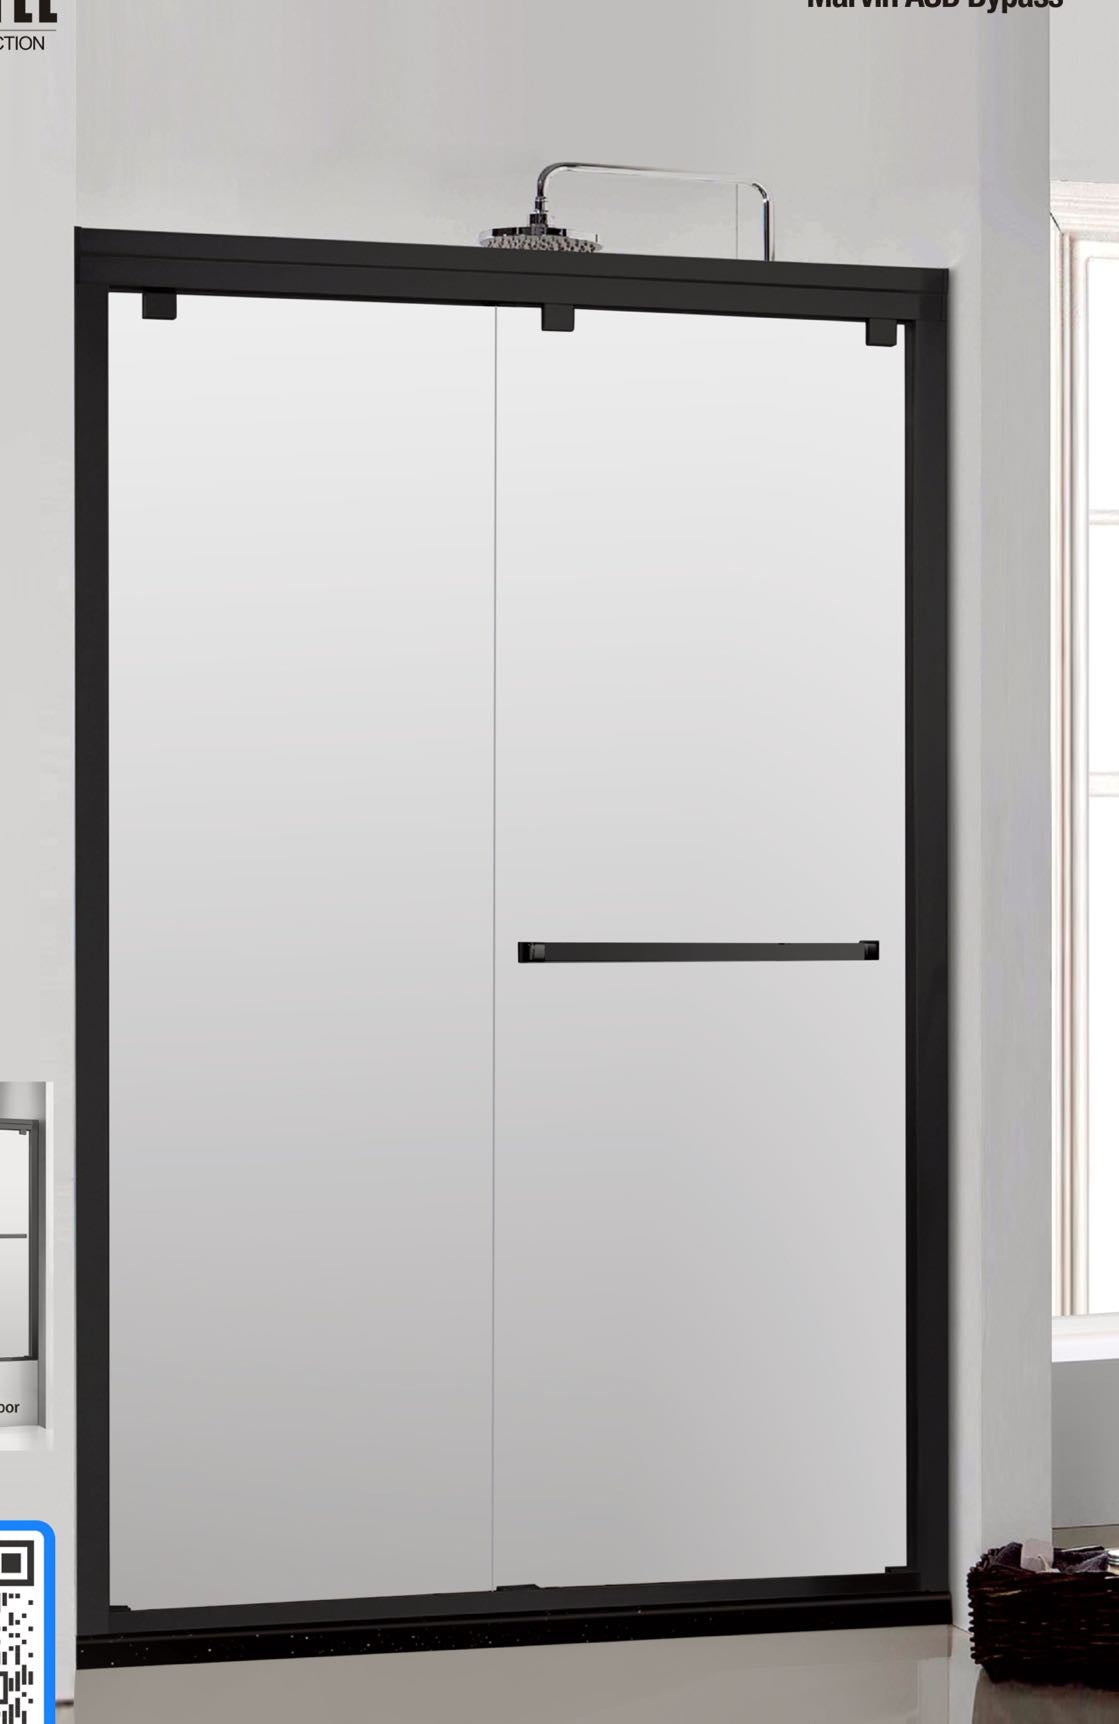 54" Forsted ASD Series Bypass Standing Shower Door (5/16" Thickness) (Matte Black) Low Ceiling Privacy